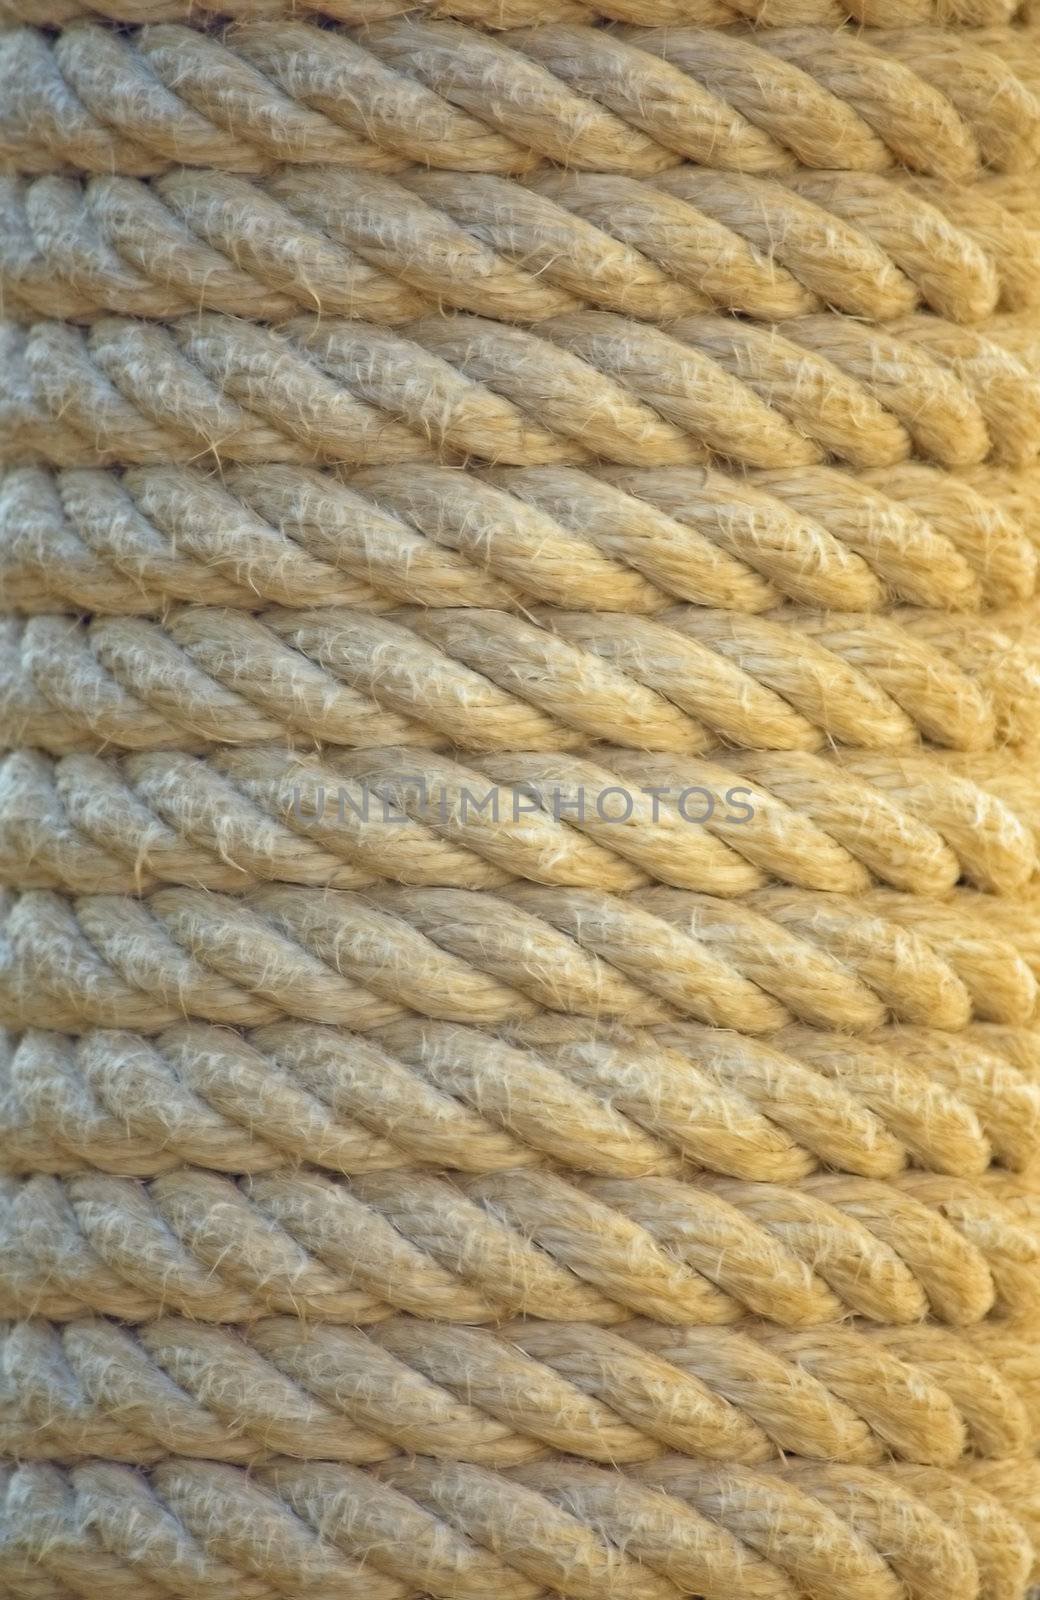 This unusual and interesting background is the thick cord wound round a column.
